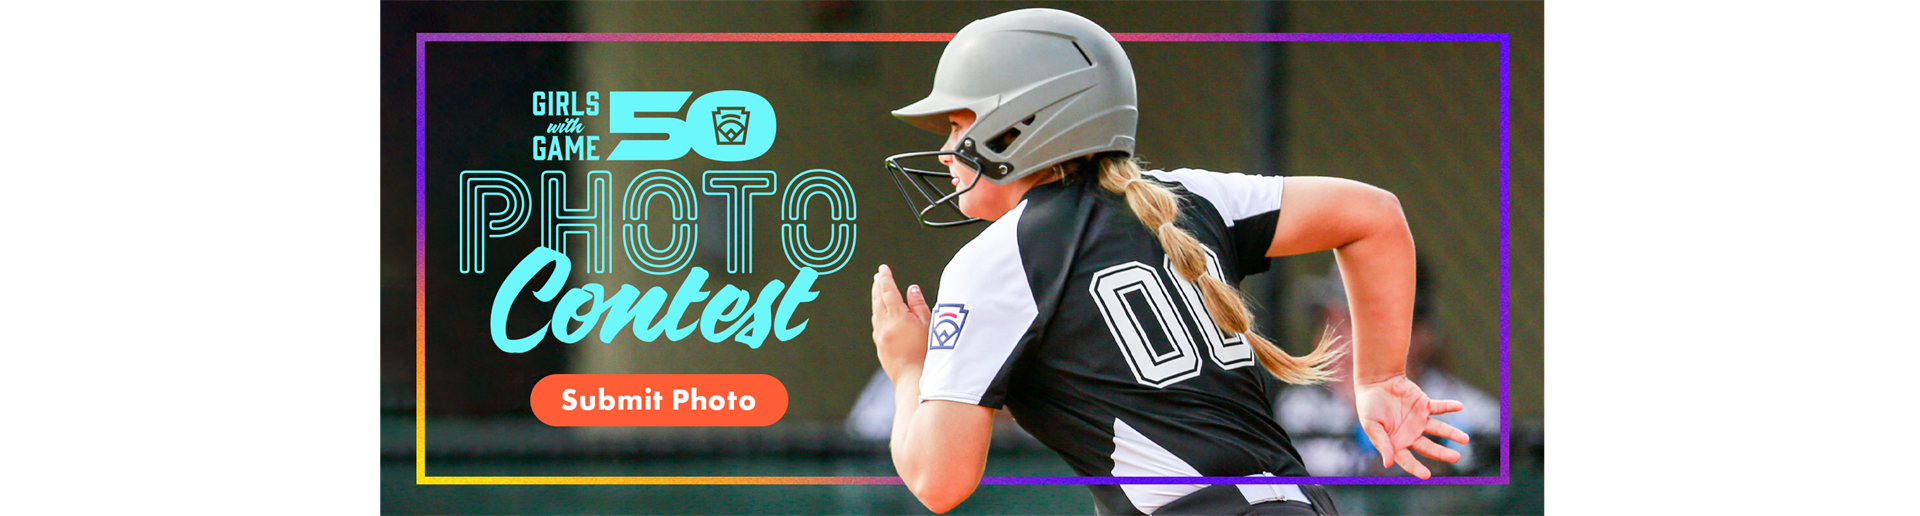 Girls With Game Photo Contest